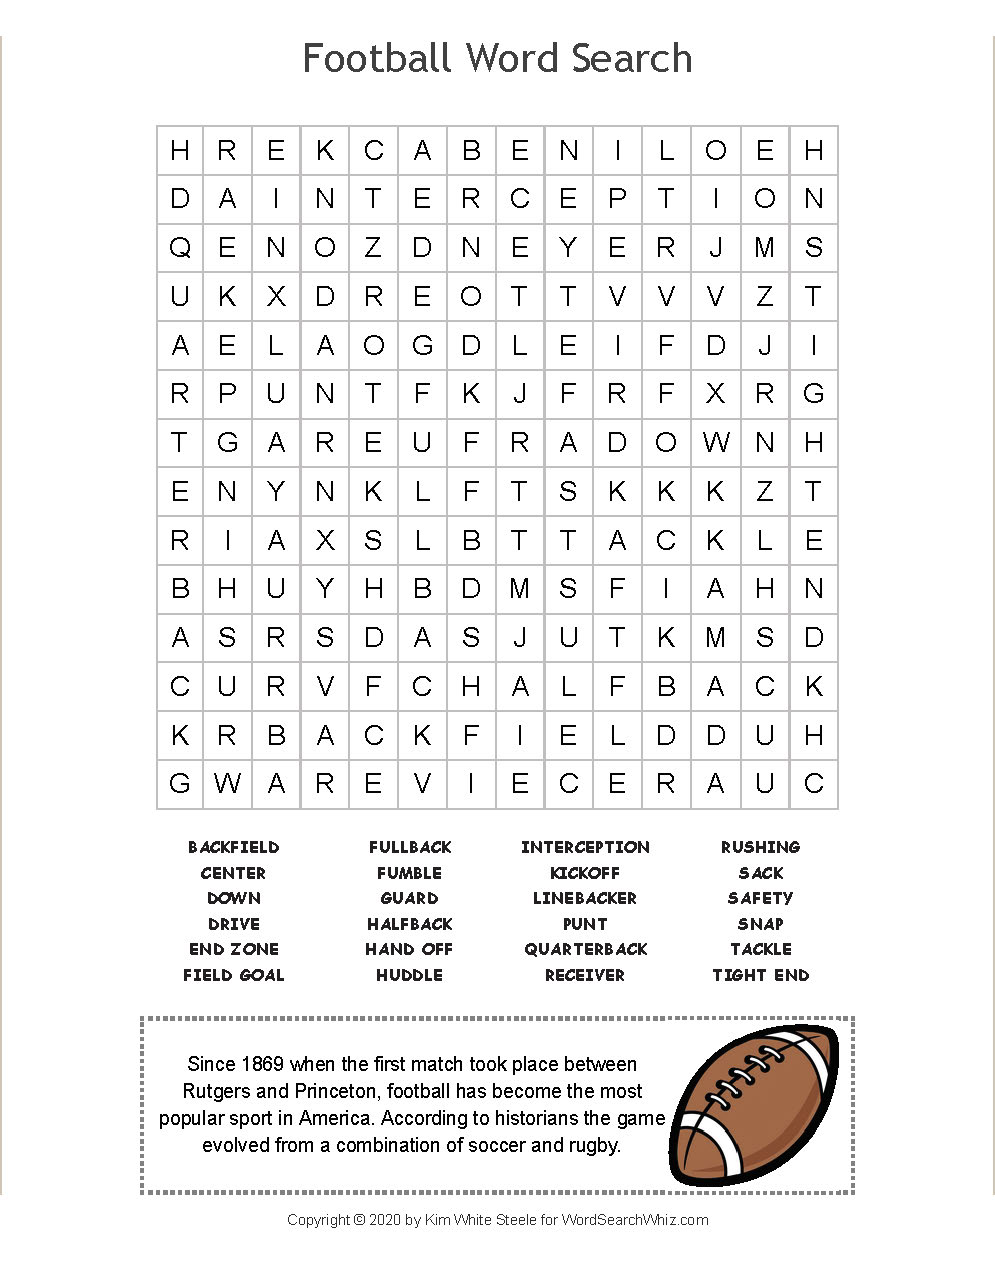 printable-sports-word-search